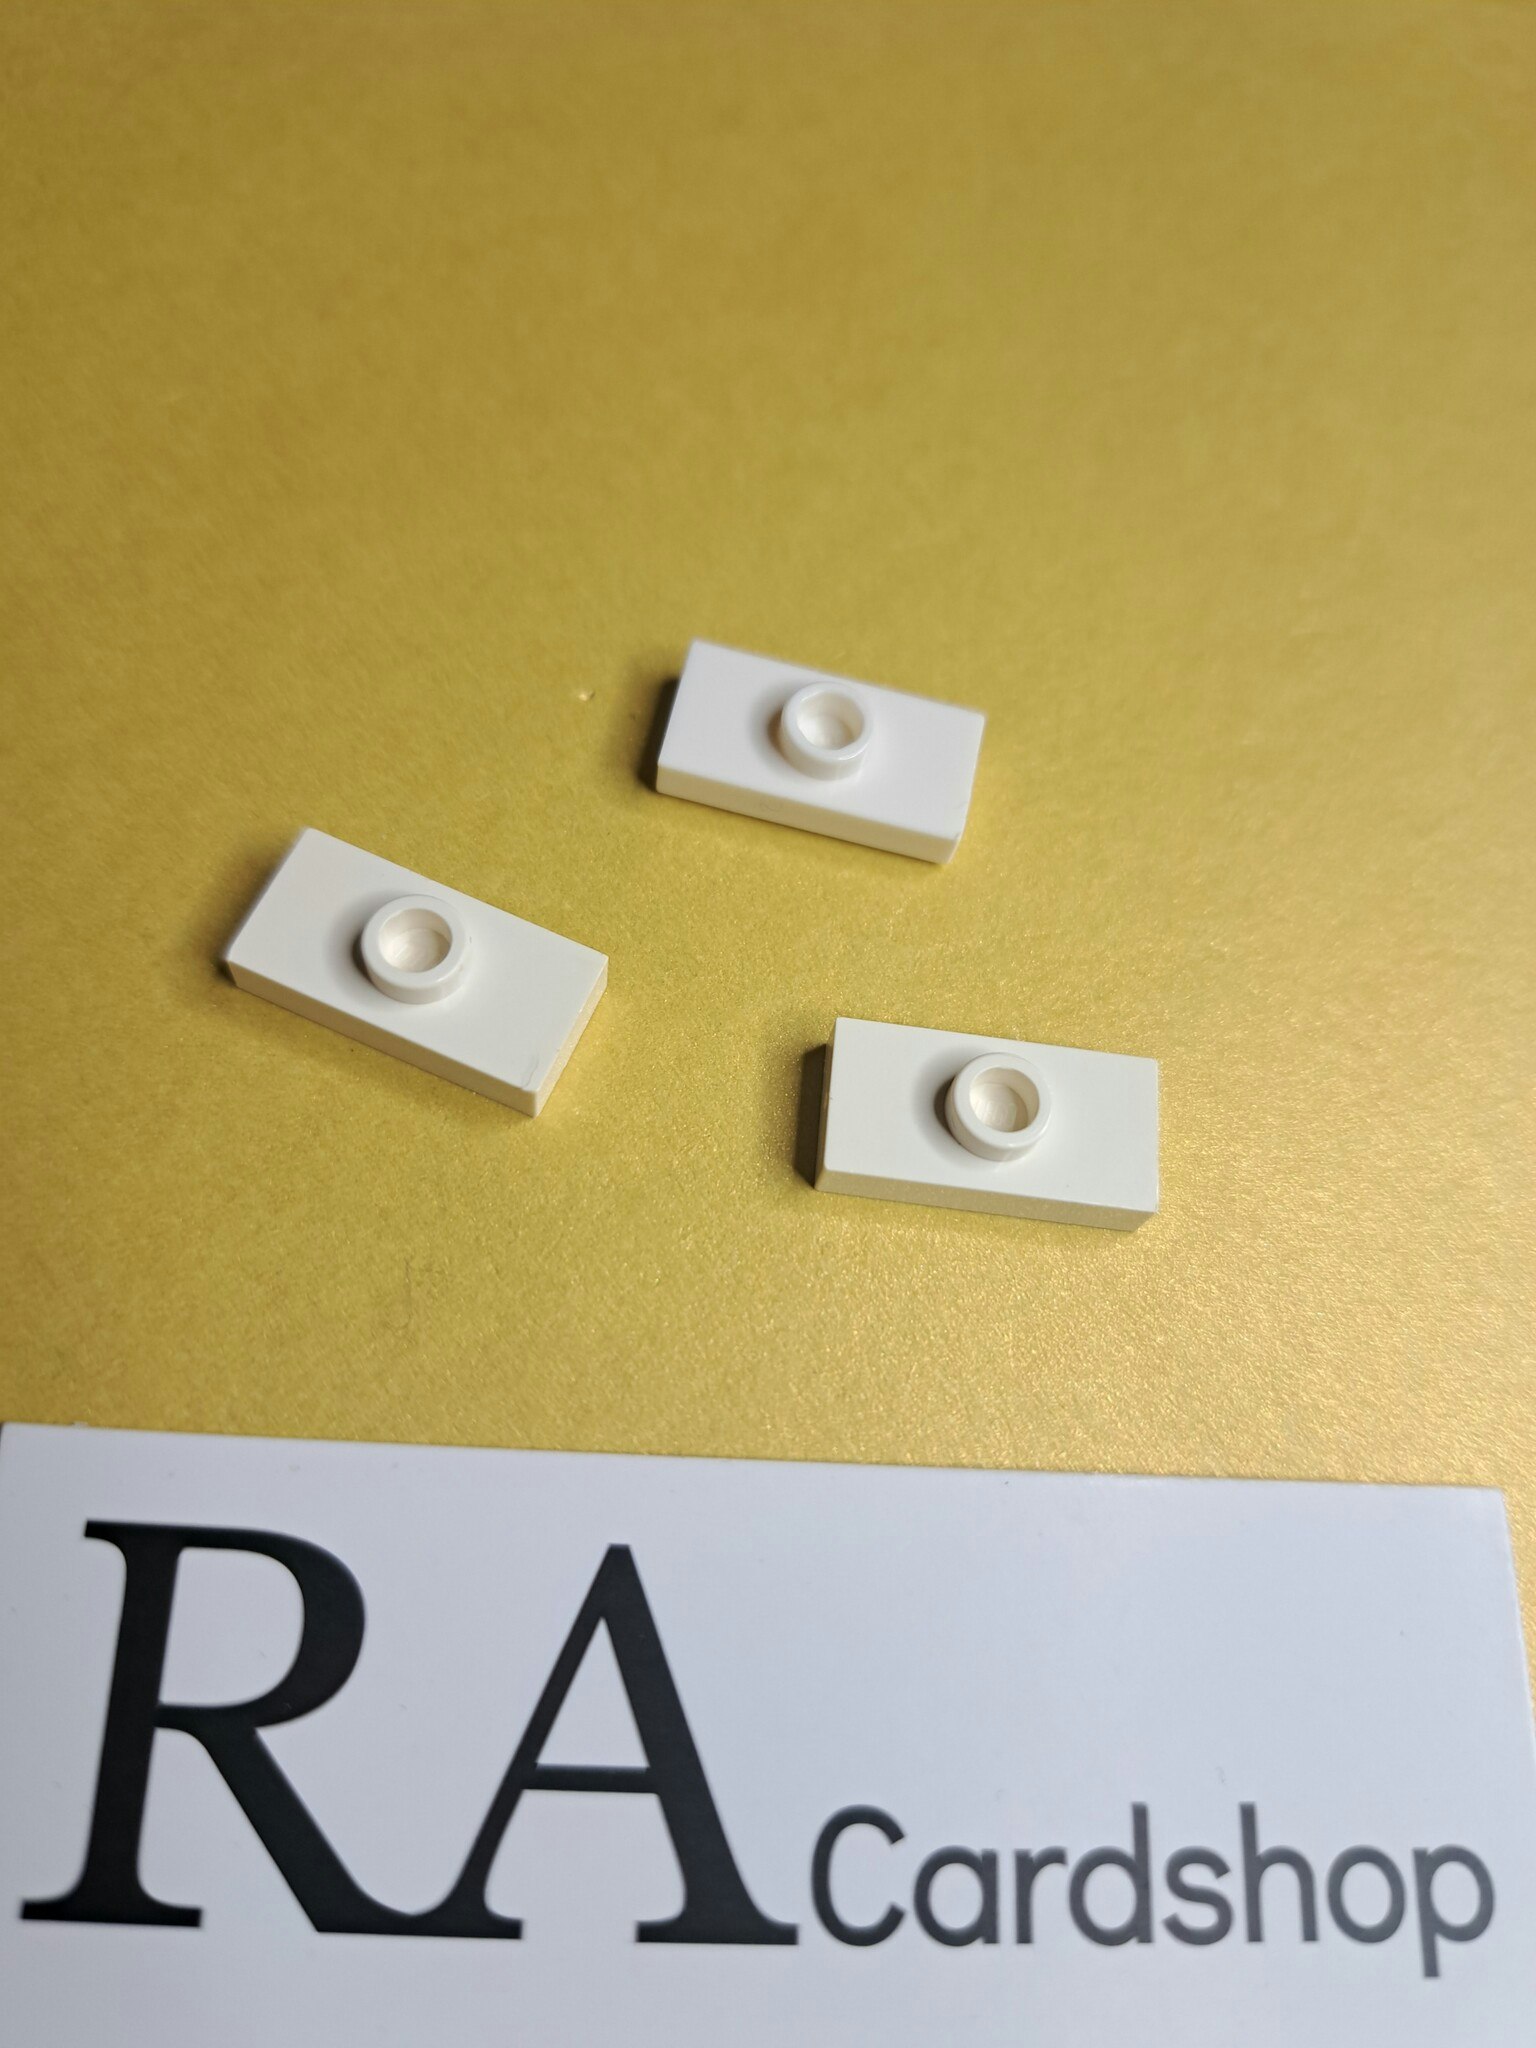 15573 Plate, Modified 1 x 2 with 1 Stud with Groove and Bottom Stud Holder (Jumper) White Lego